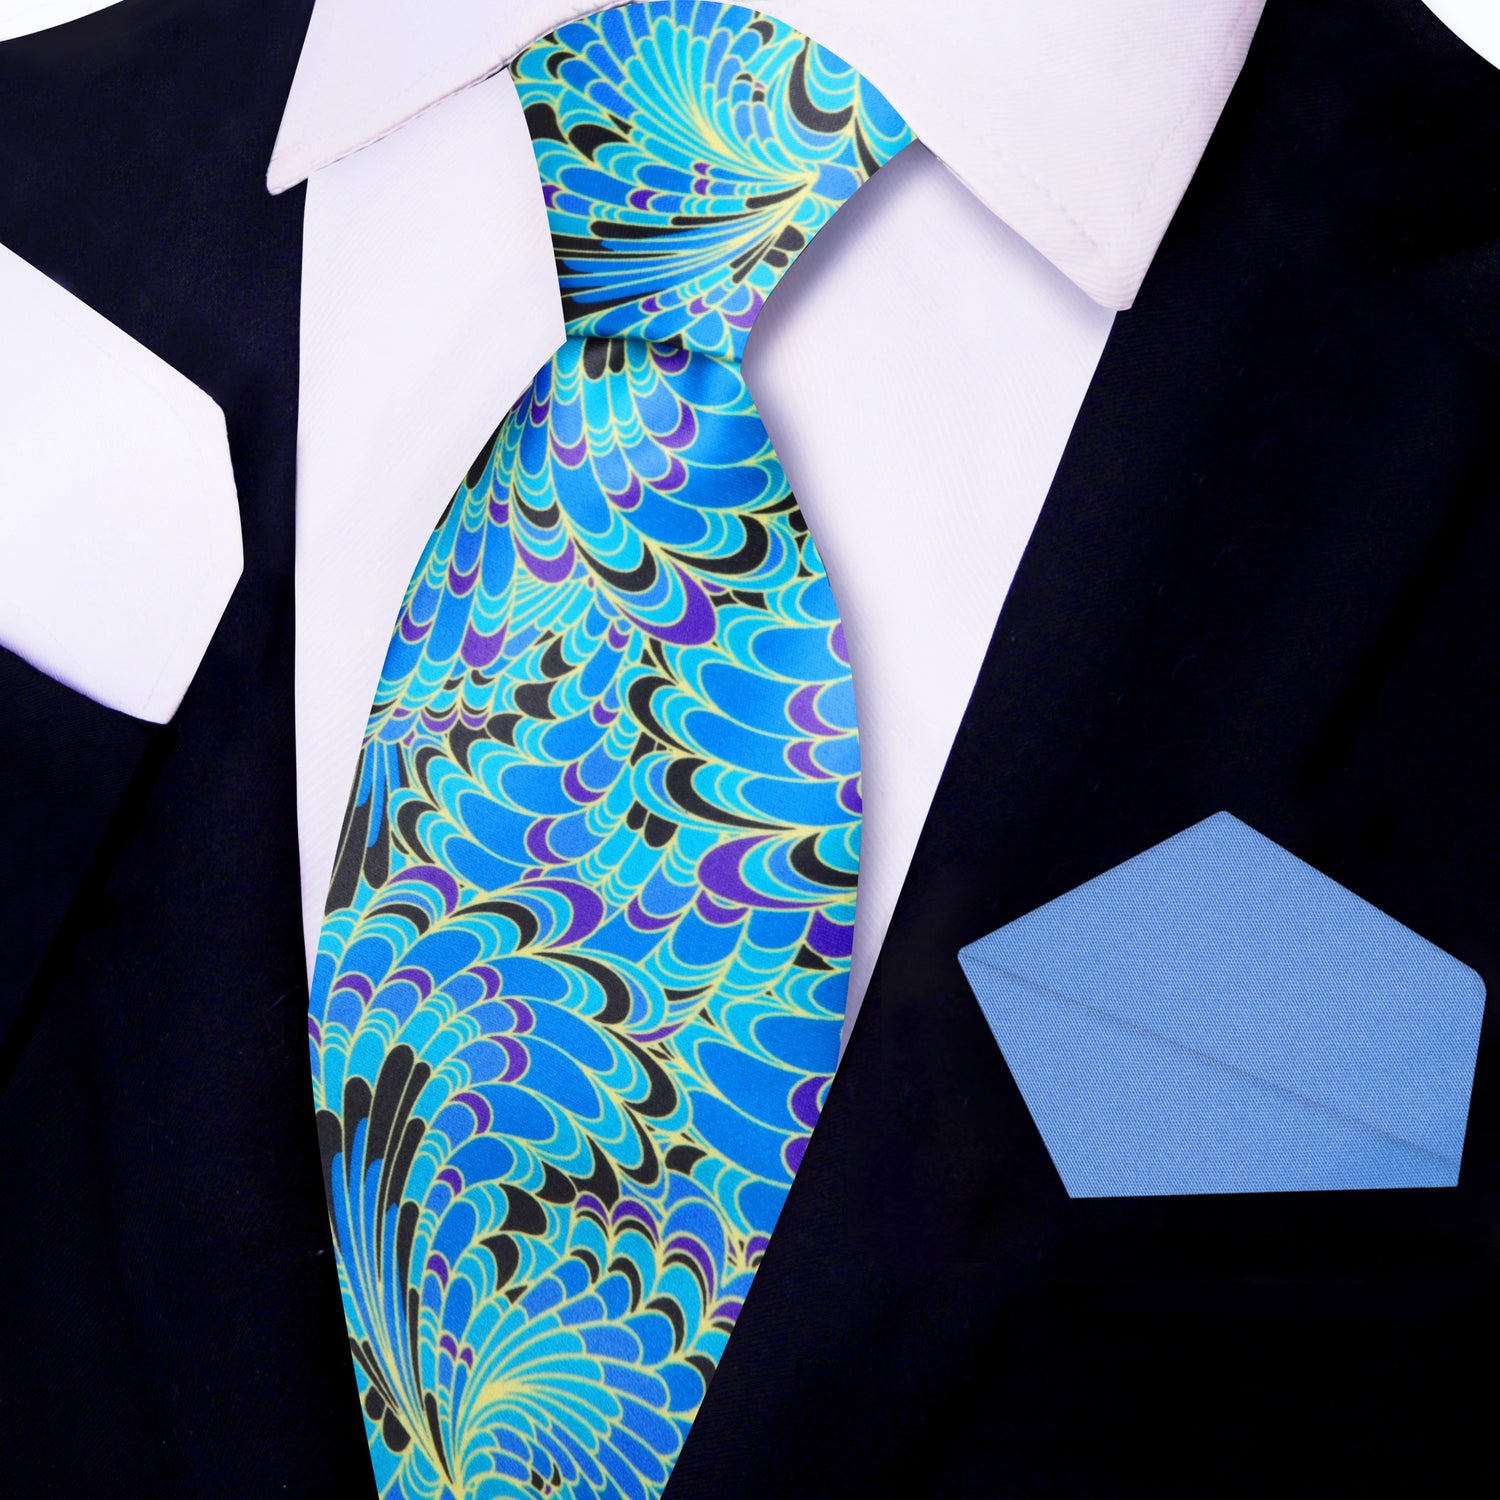 View 2 Blue, Black, Yellow, Purple Peacock Feathers Necktie with Light Blue Square